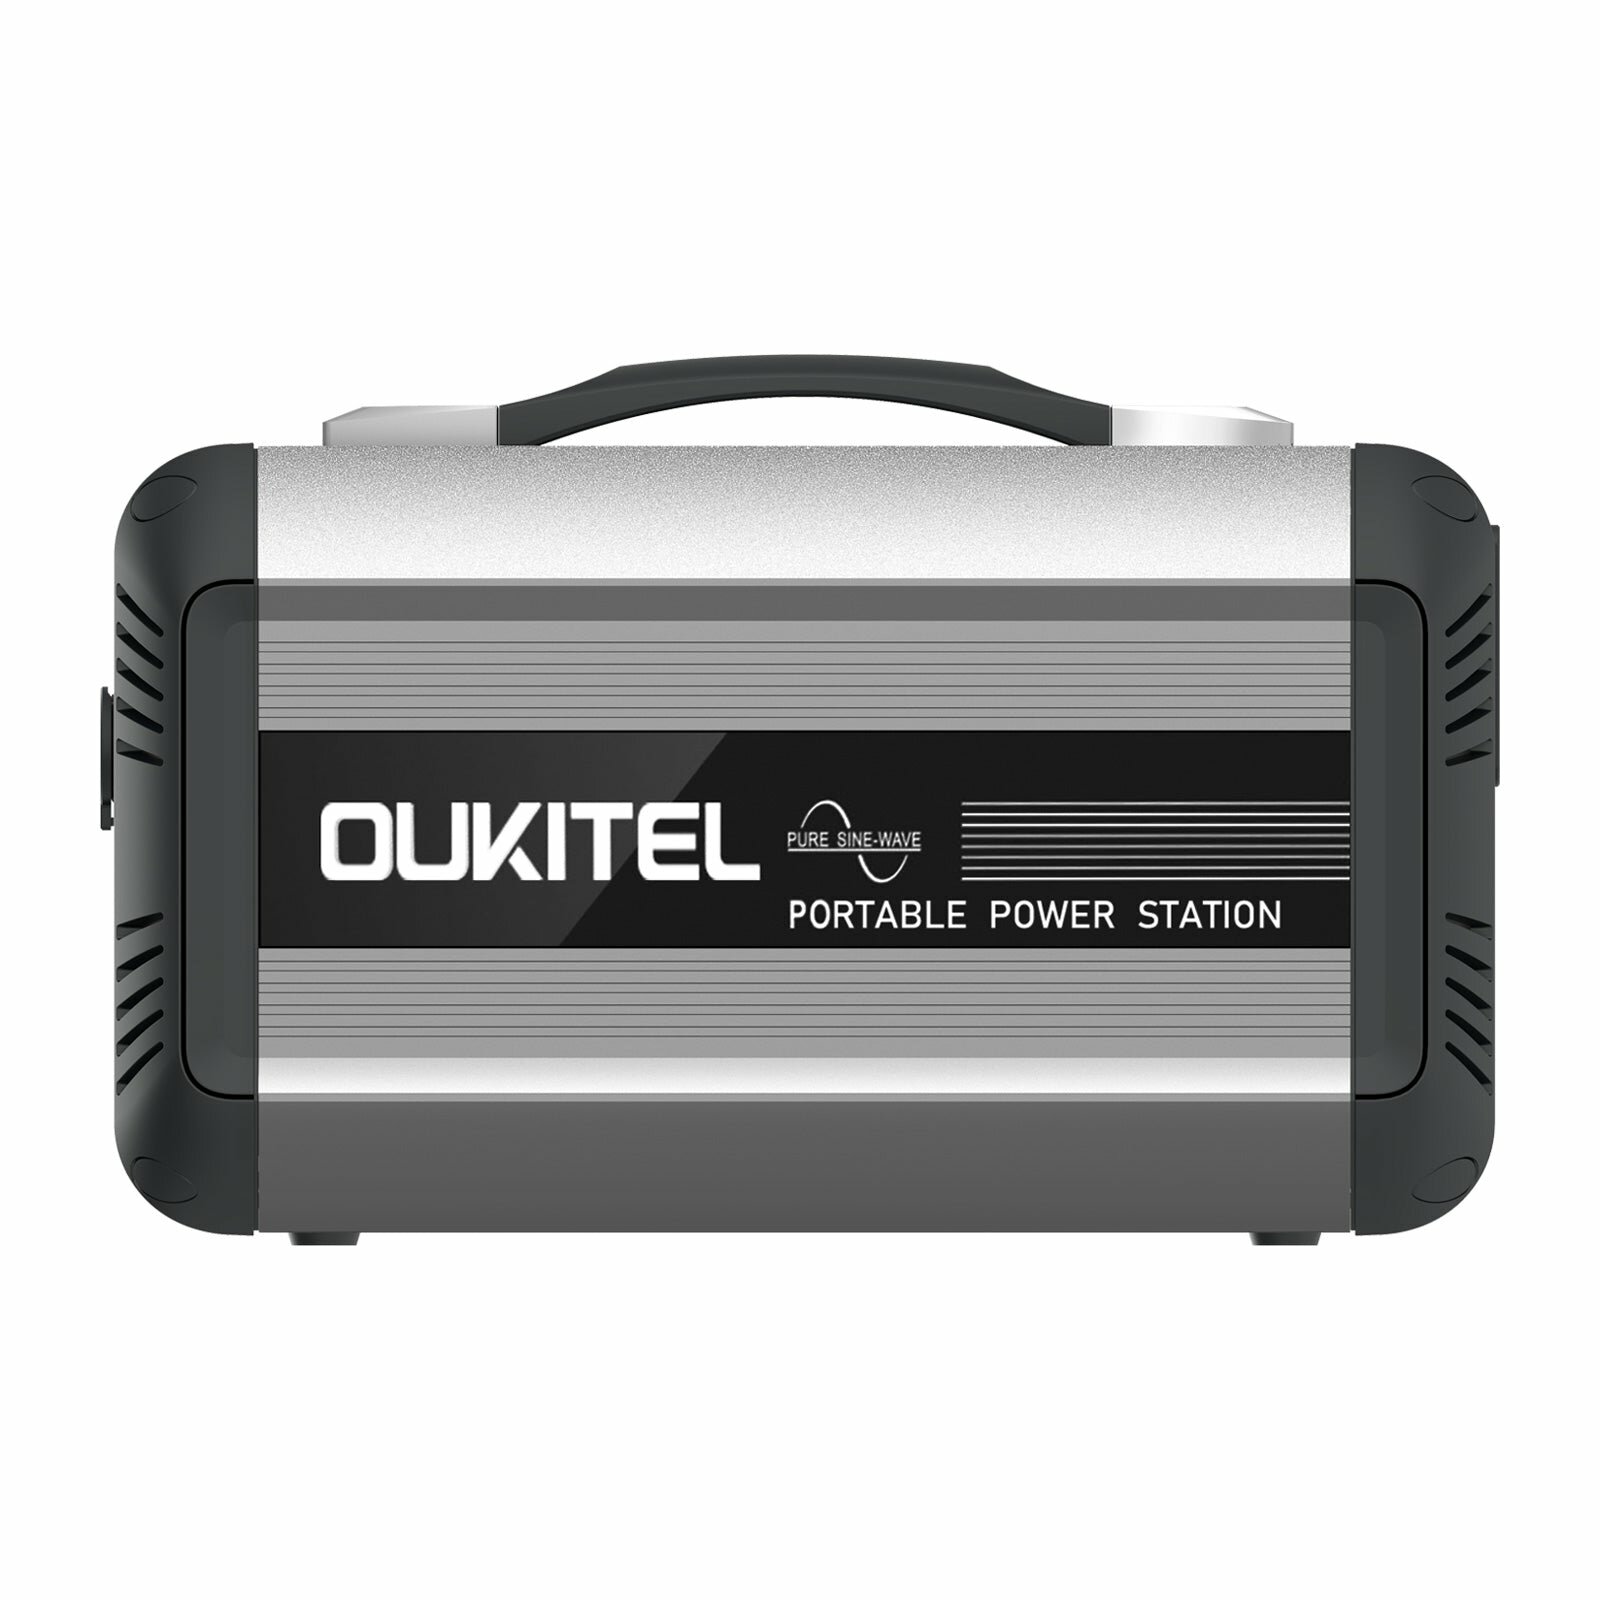 [US Direct] OUKITEL CN505 614Wh Portable Power Station LiFePO4 Lithium Iron Battery Back with 10 Versatile Outlets For Home Tool Outdoor Camping Devices